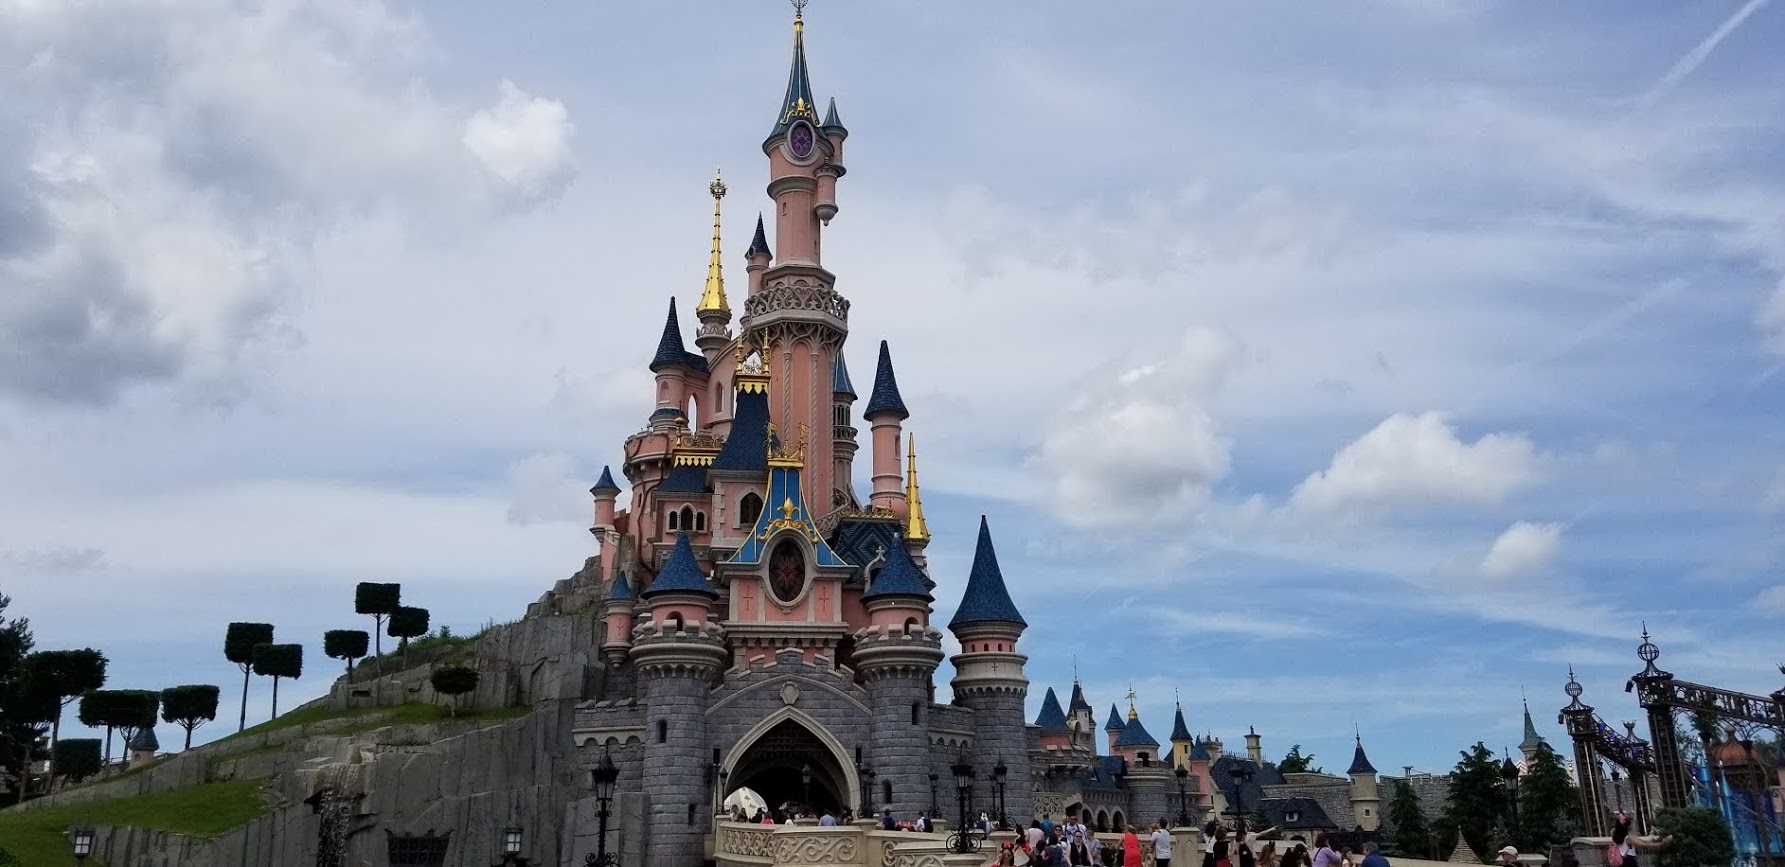 France bans large outdoor gatherings till September. What does this mean for Disneyland Paris?